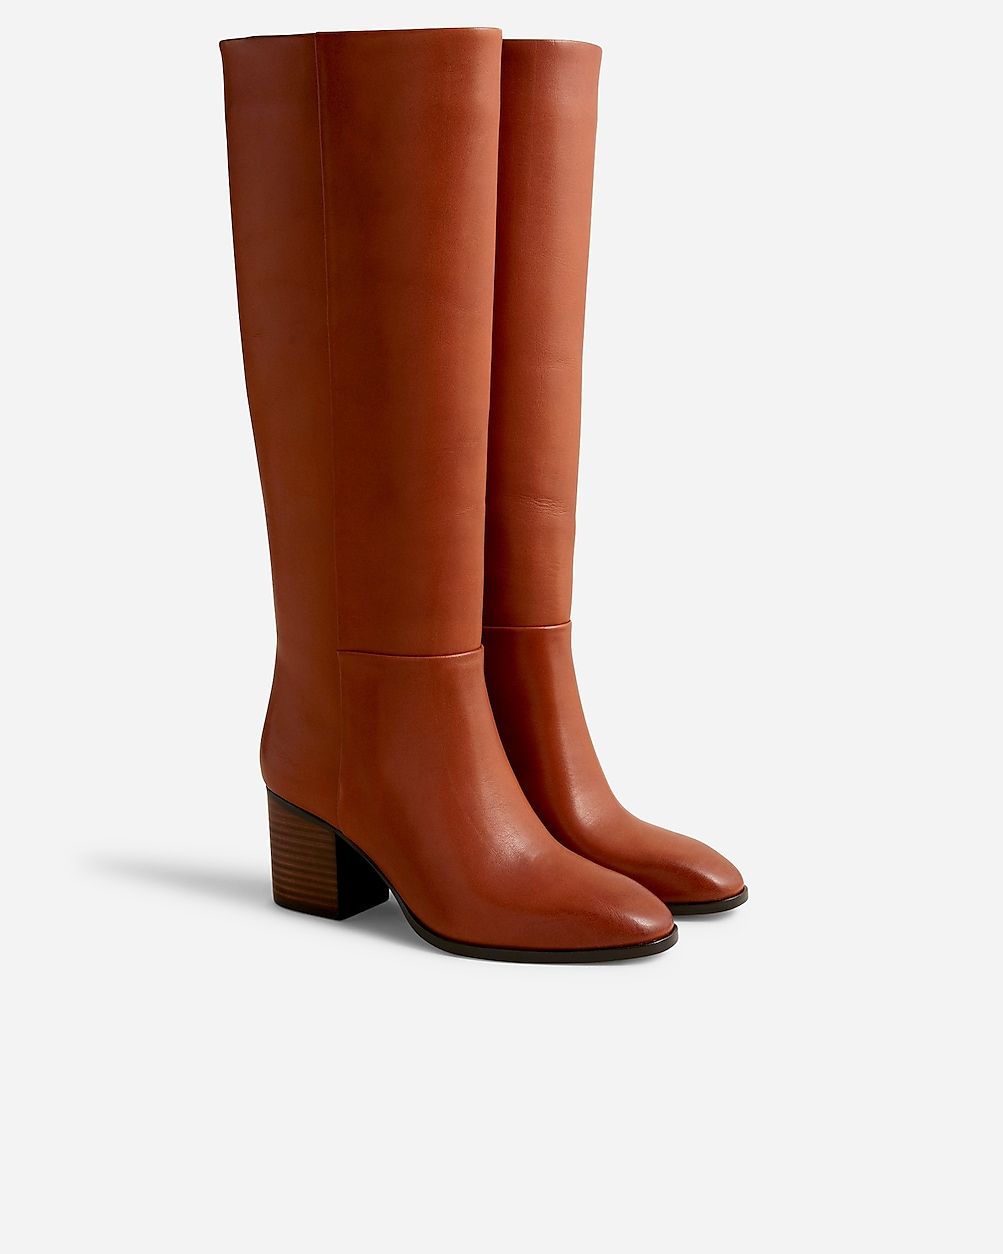 Sadie knee-high boots in leather | J.Crew US